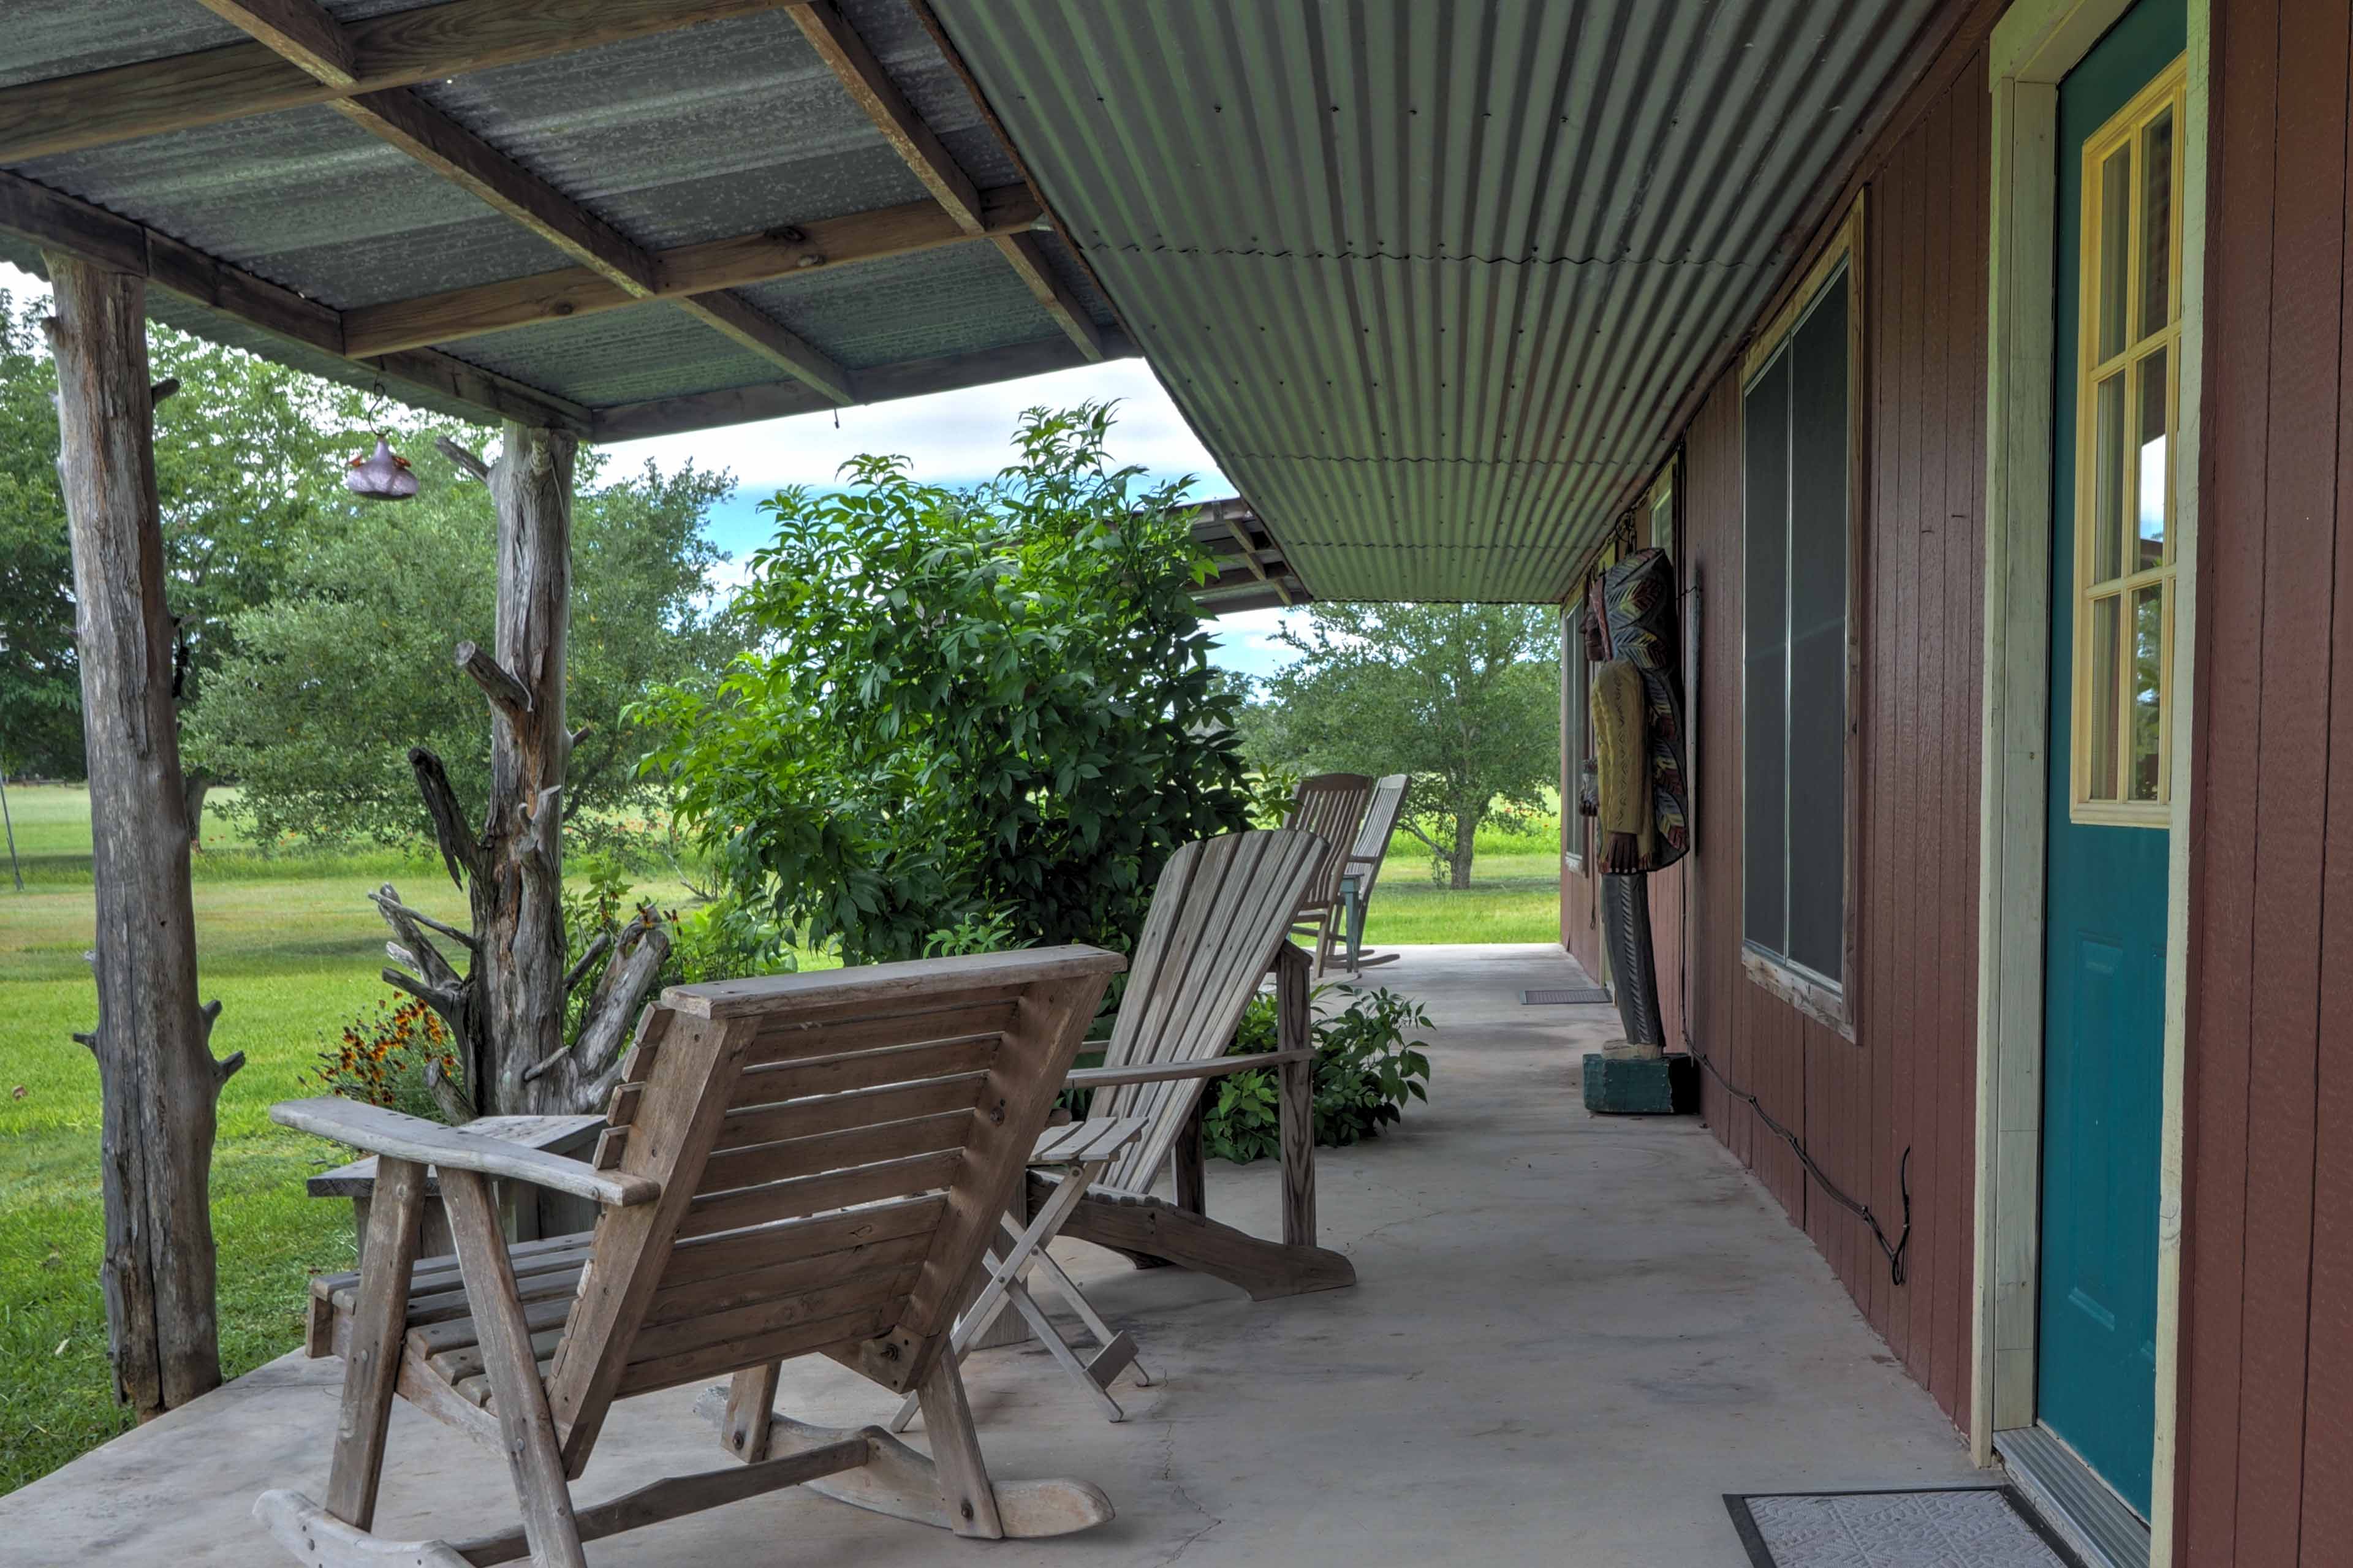 The porch is covered so you can enjoy the outdoors in any weather.